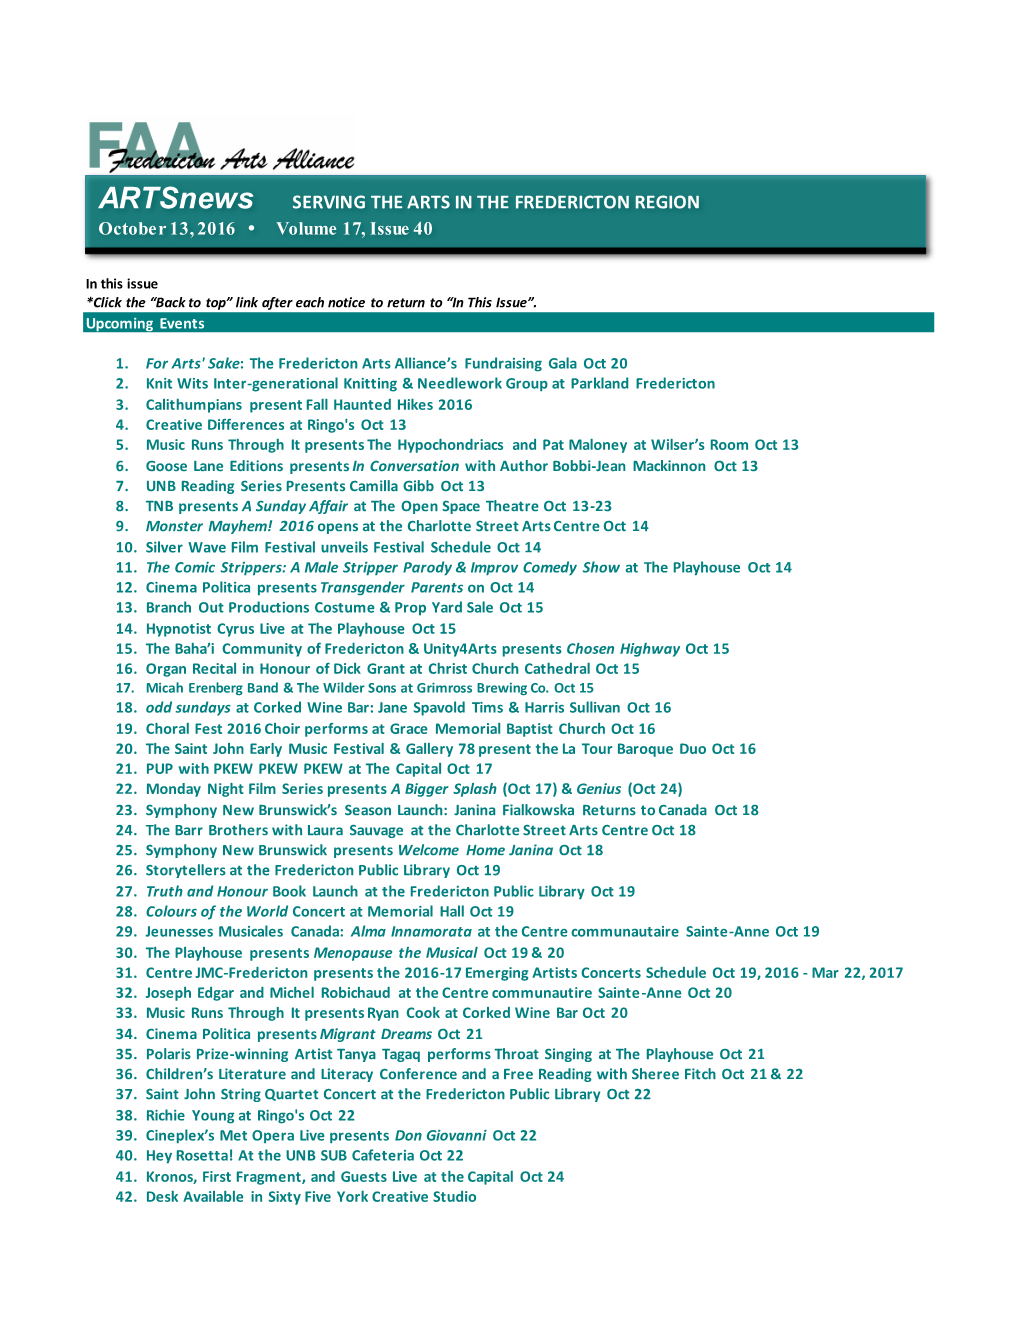 Artsnews SERVING the ARTS in the FREDERICTON REGION October 13, 2016 Volume 17, Issue 40